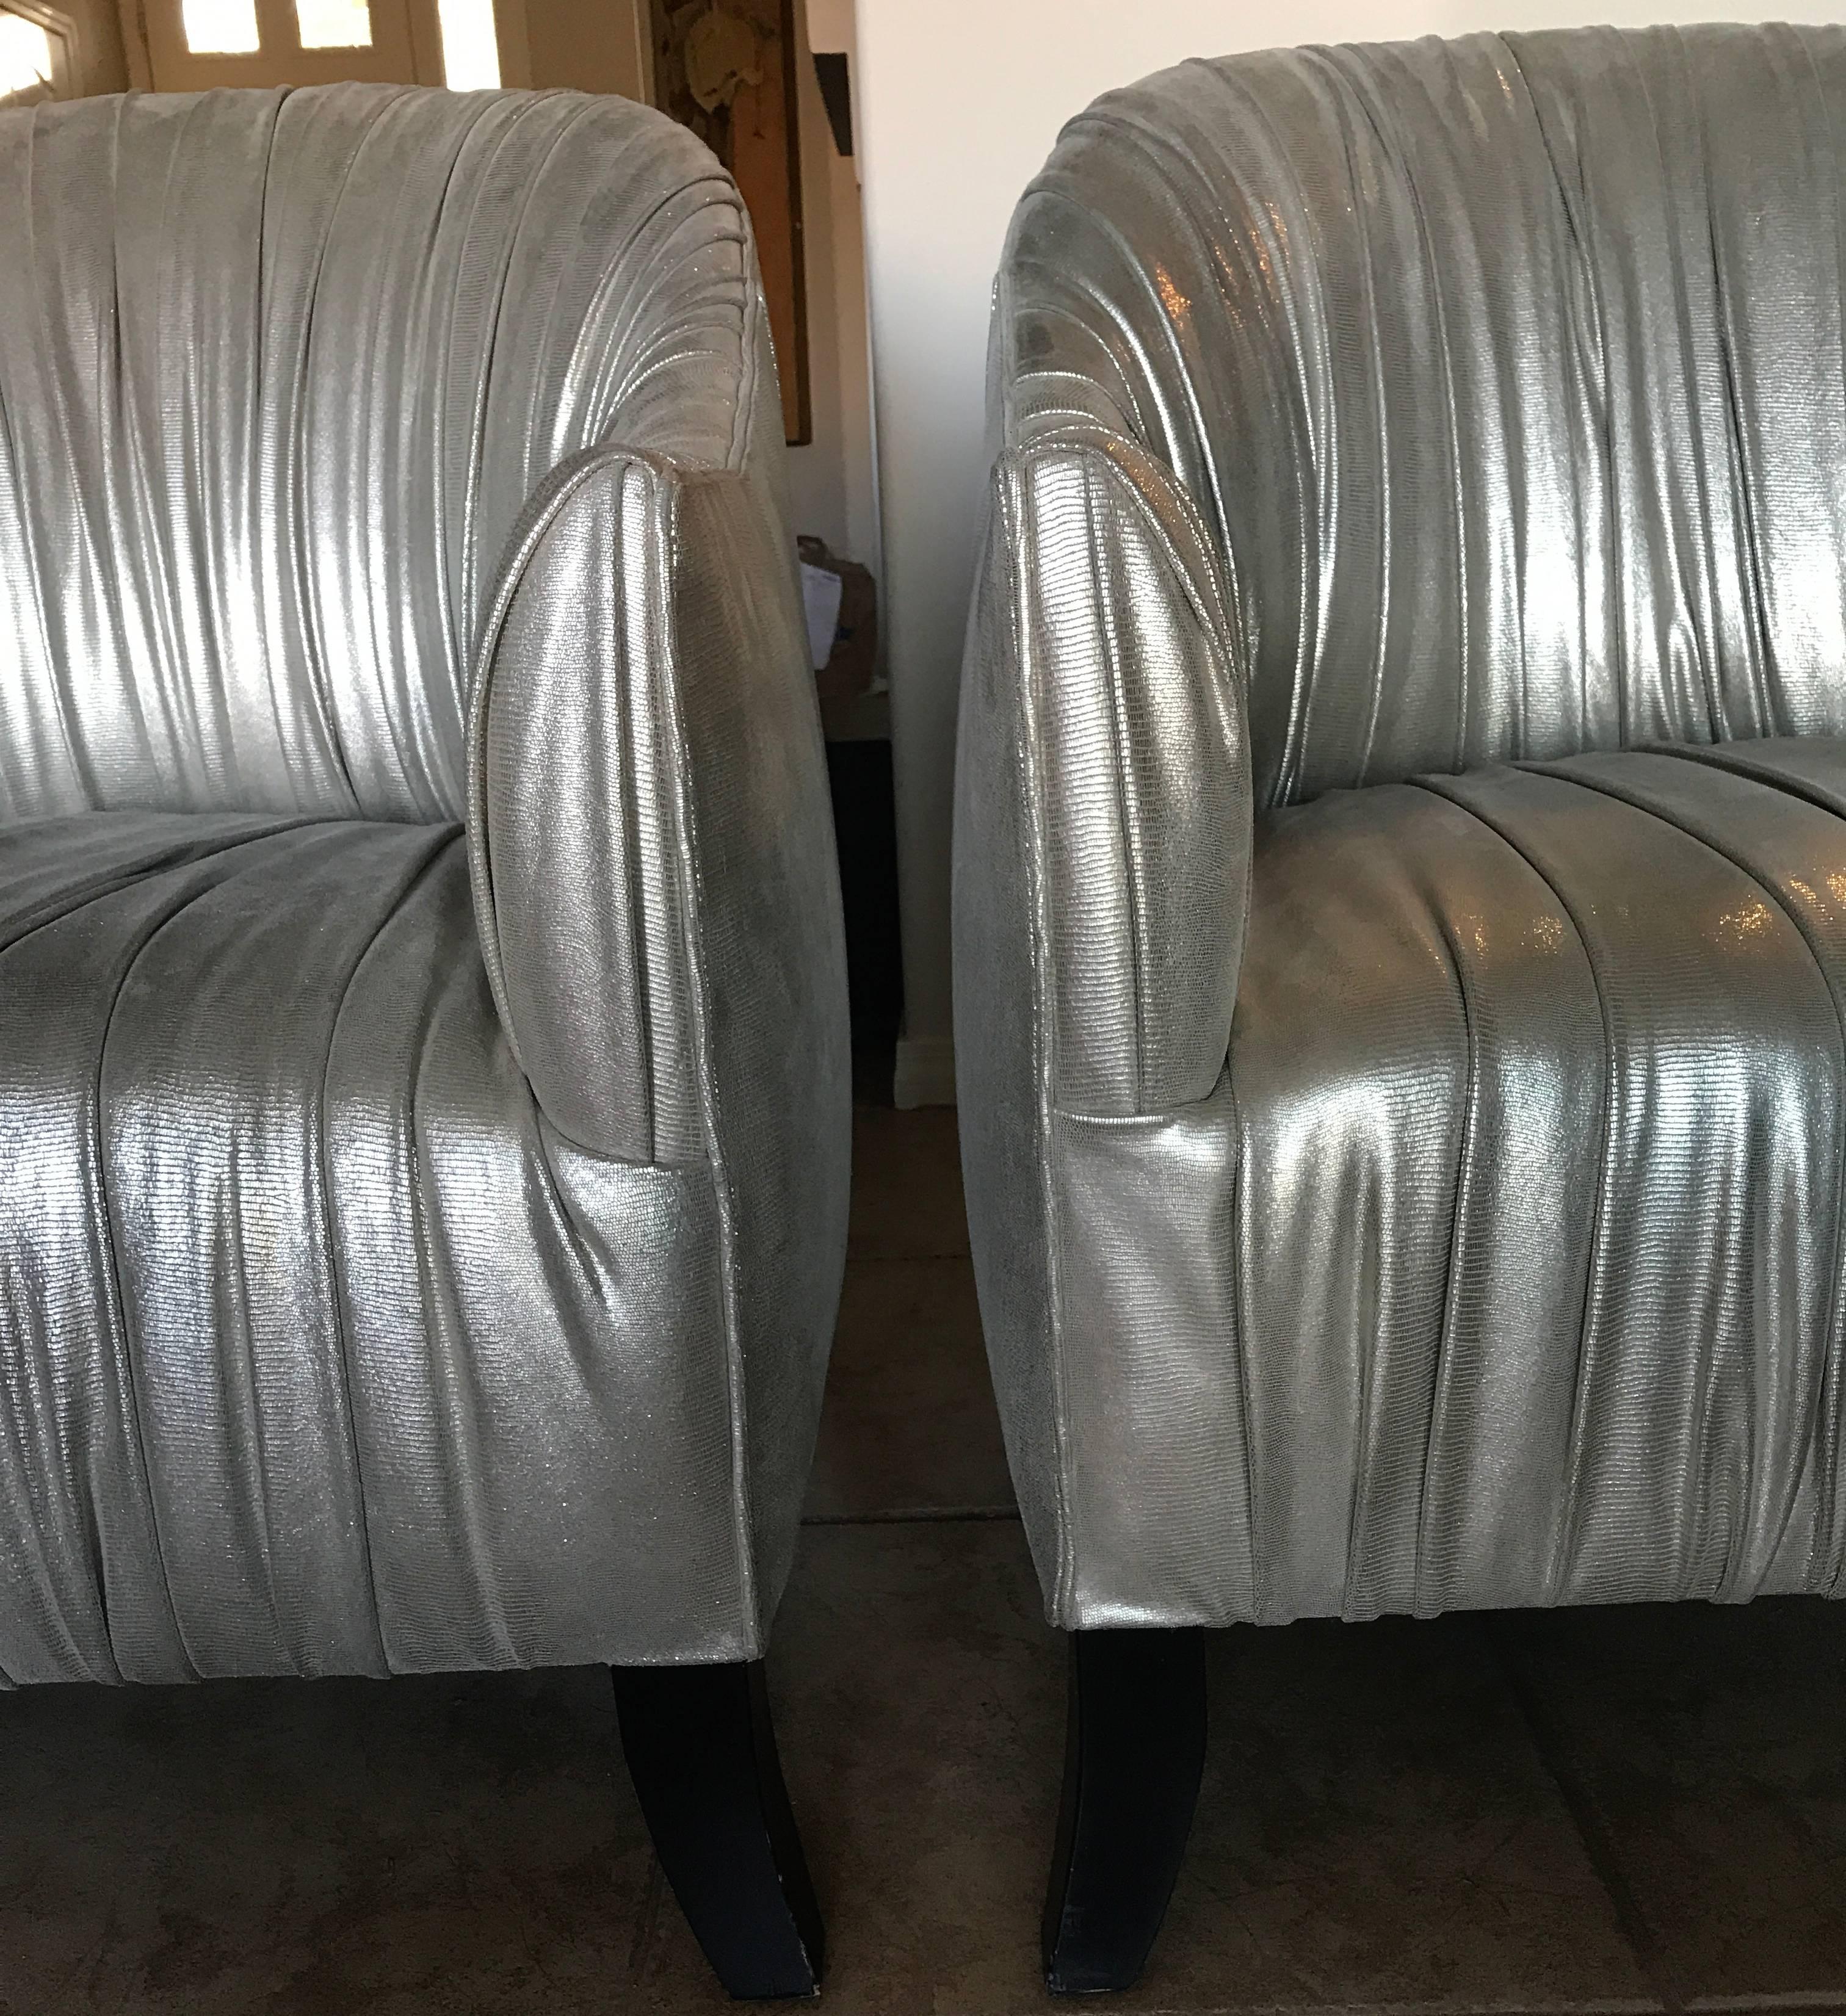 These amazingly chic, stylish chairs were custom-made in Los Angeles for a celebrity client and never used. They were hand made in the most expensive metallic silver leather hides costing thousands in skins alone. The entire fronts are ruched a la